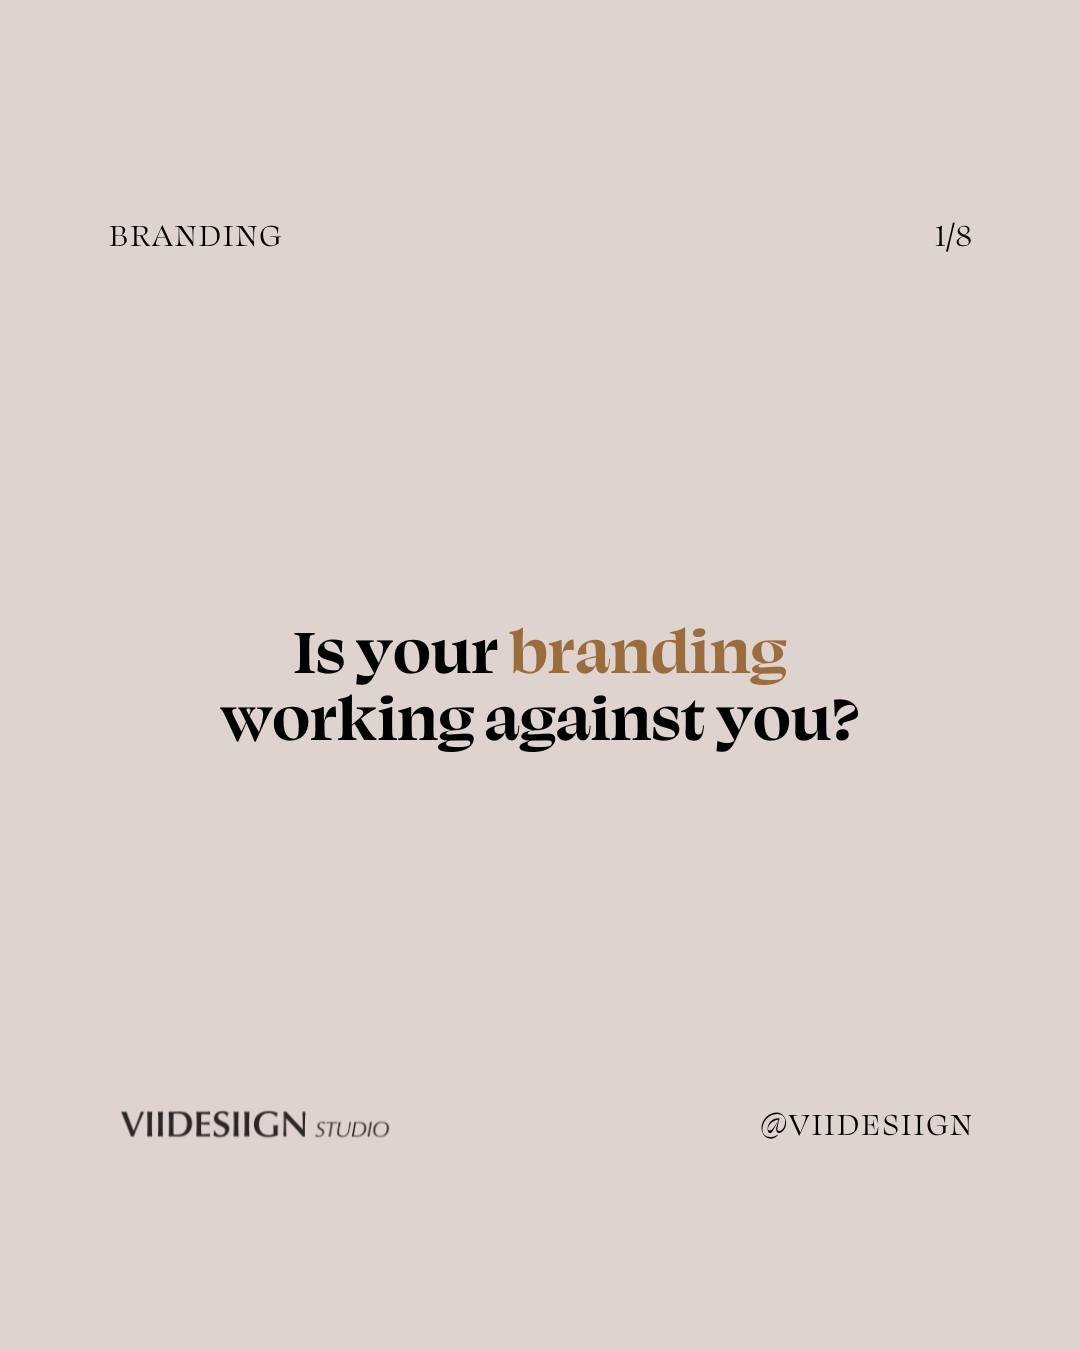 Take a moment to reflect on your branding choices ⏰

Is your brand making the impact you desire?

From crafting captivating brand stories to ensuring consistency and transparency, we're here to guide you towards brand excellence.

Ready to take the l